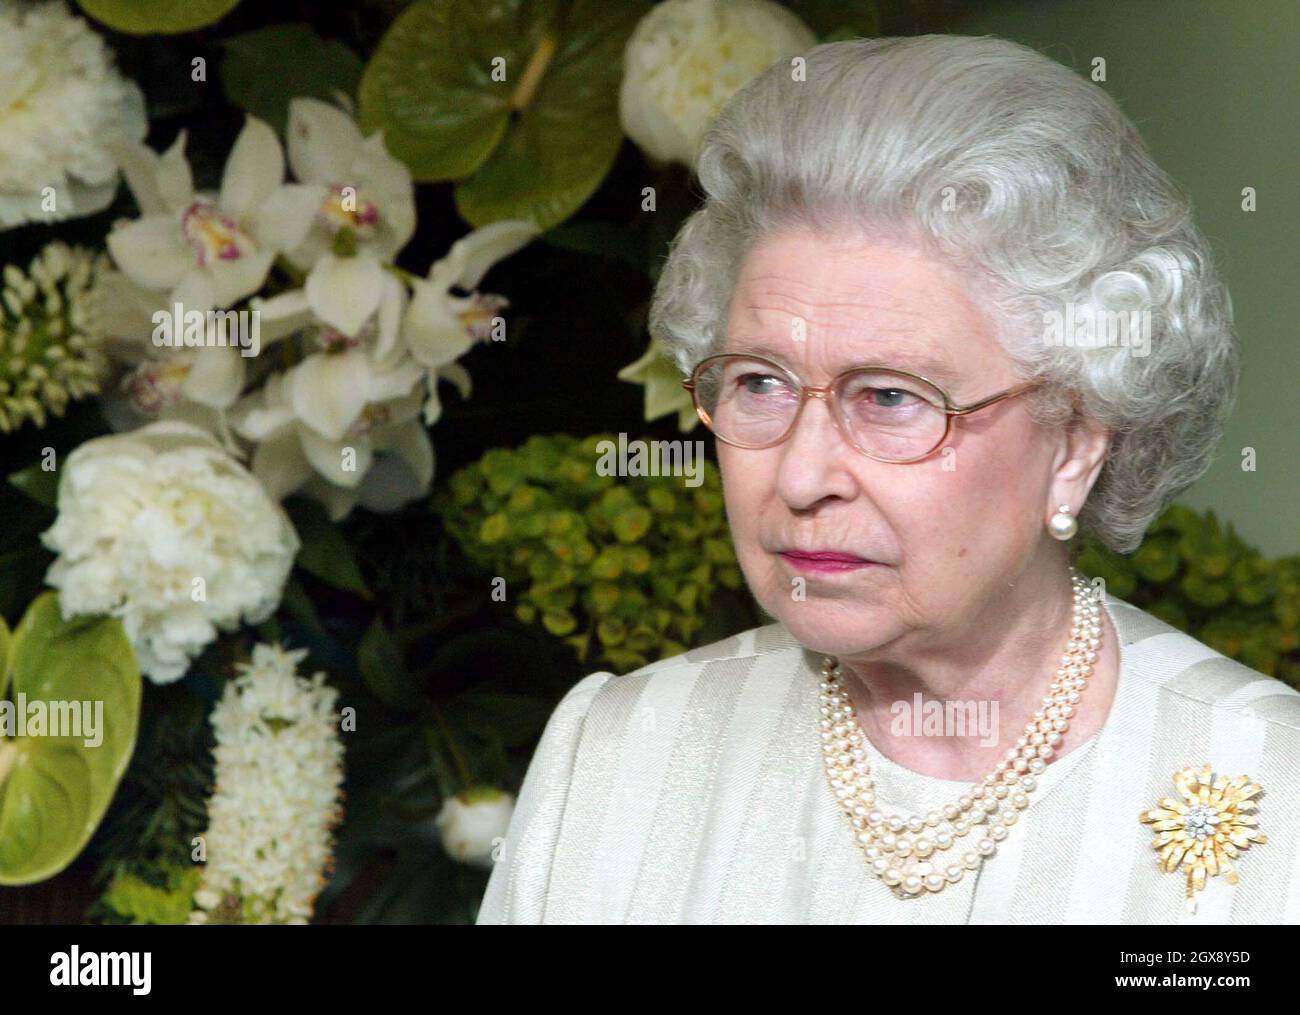 The Queen examines exhibits during her visit to the Royal Horticultural Society's Chelsea Flower Show in London. Head shot, glasses, Royals  Â©Anwar Hussein/allaction.co.uk  Stock Photo